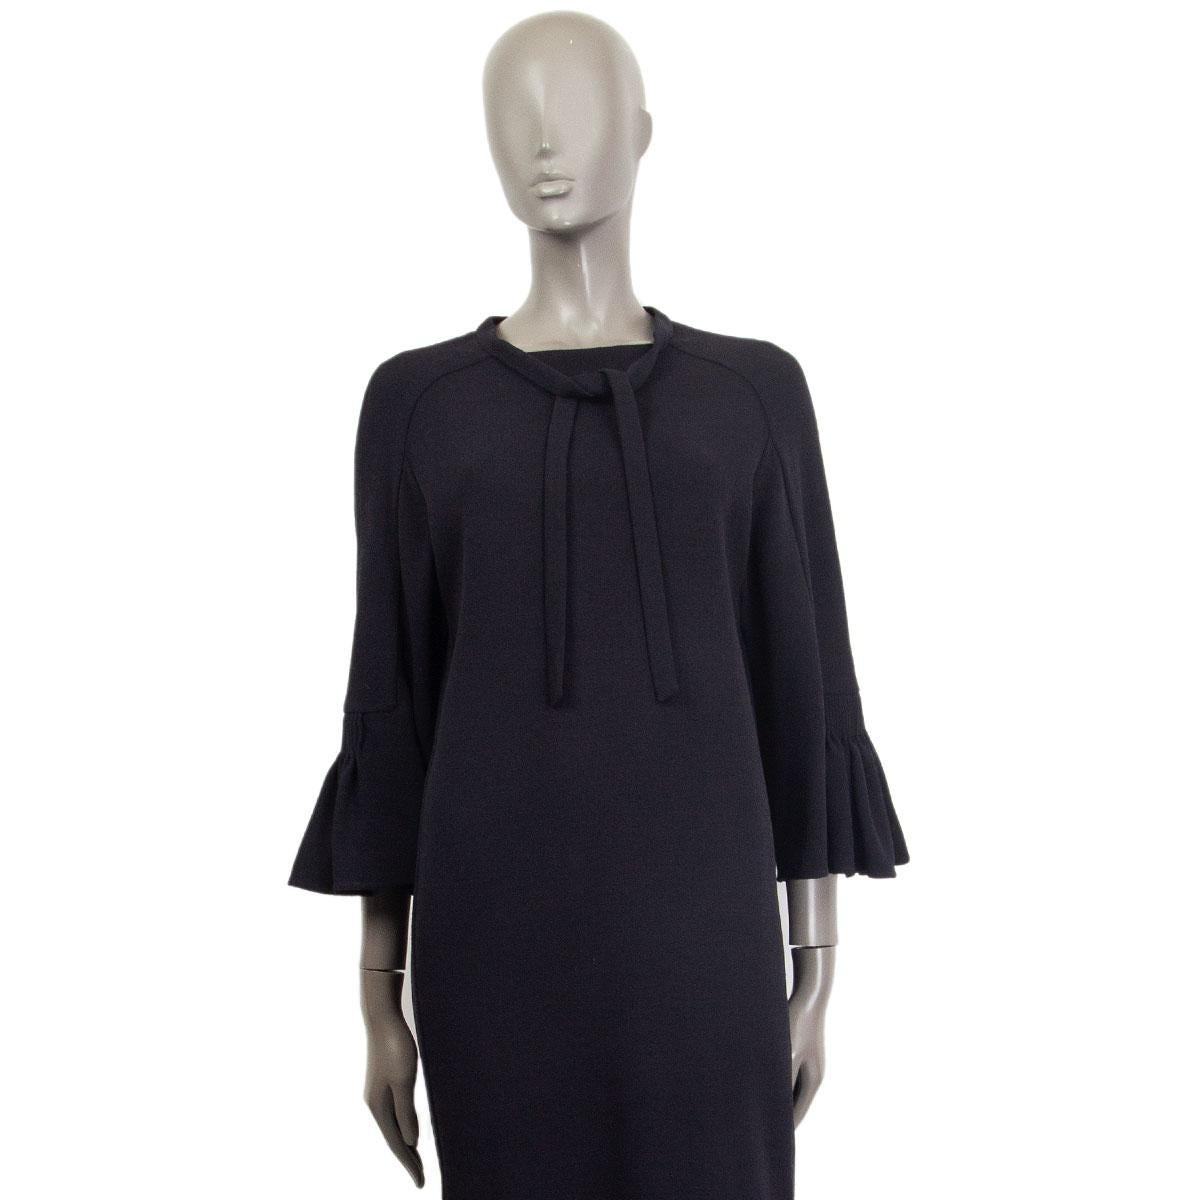 100% authentic Hermes oversized 3/4 ruched sleeve dress in midnight blue wool (100%) with tie detail around the neck. Lined in midnight blue silk (100%). Has been worn once and is in excellent condition. 

Measurements
Tag Size	36
Size	XS
Shoulder